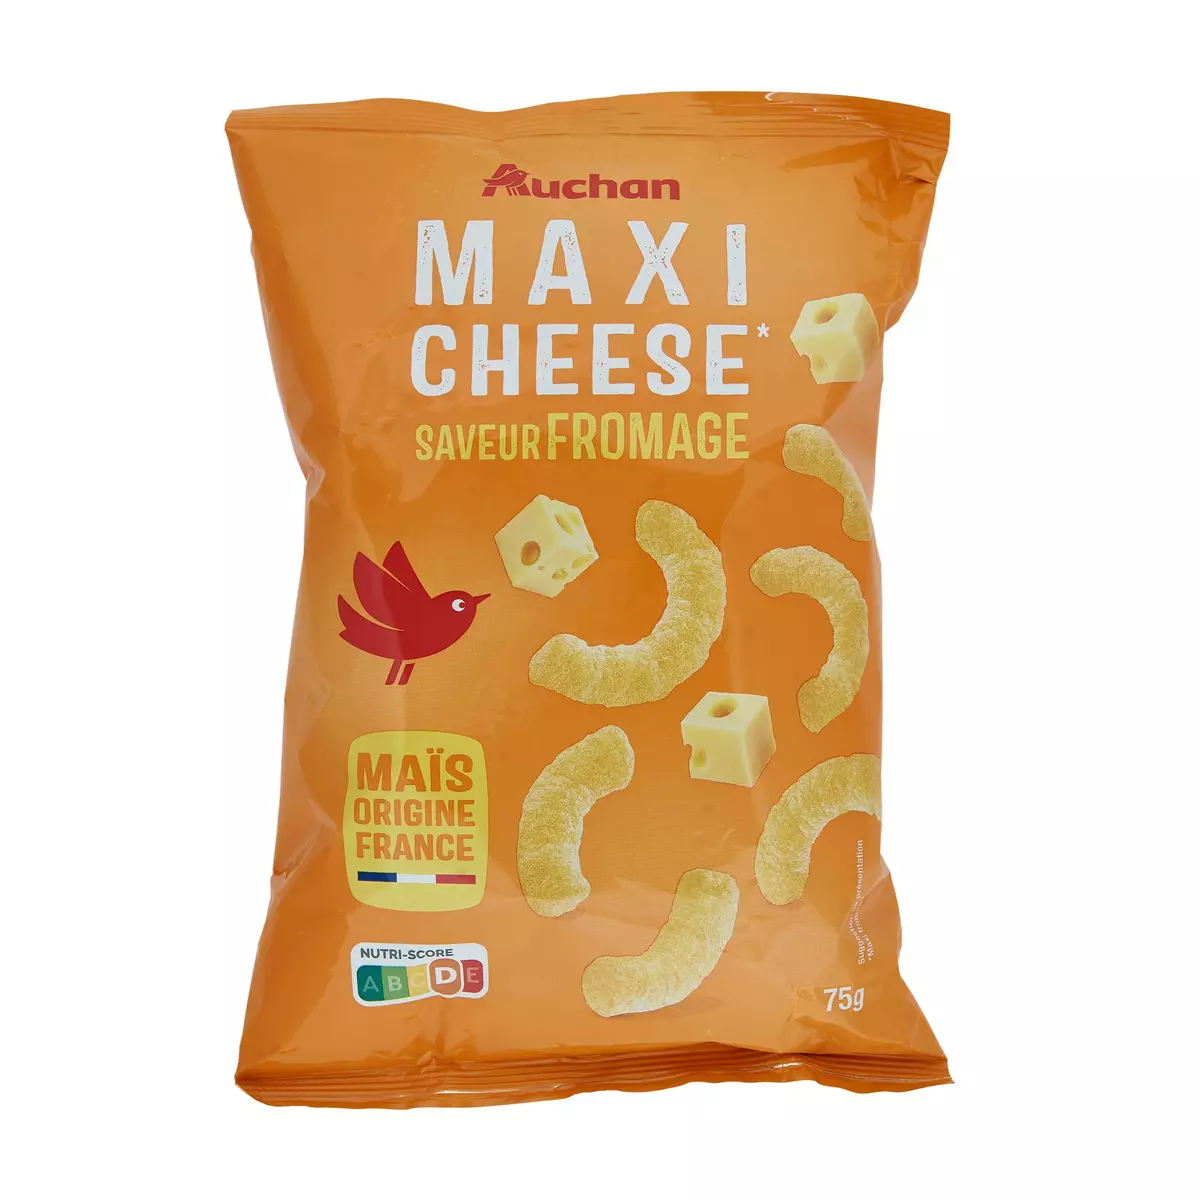 AUCHAN Maxi Cheese biscuits soufflés saveur fromage 75g